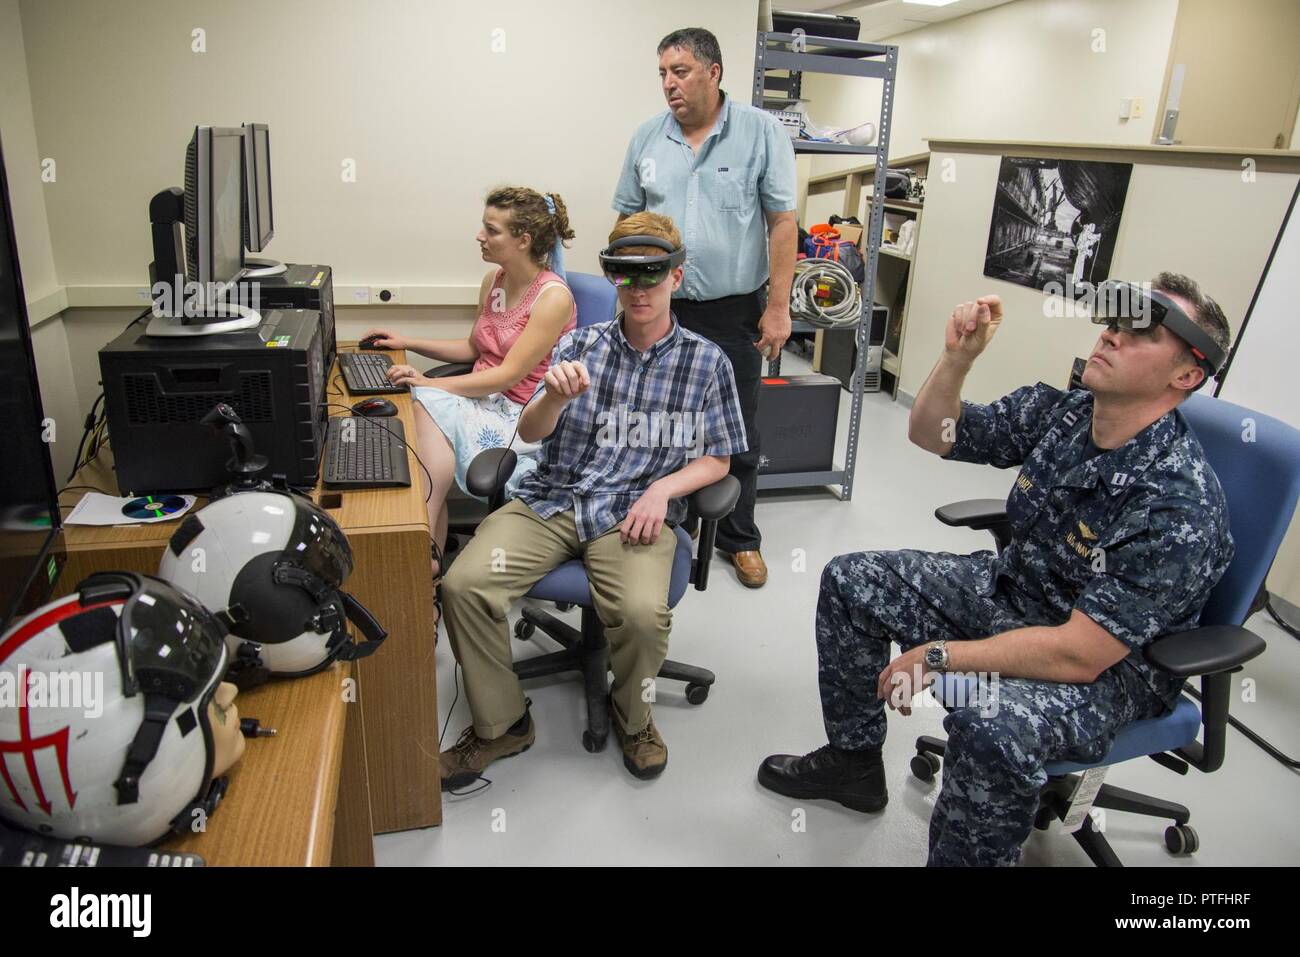 Rachel Meyerhofer and Jeffrey Banghart, student interns temporarily assigned to Naval Surface Warfare Center, Carderock Division's Disruptive Technology Laboratory (DTL) under the Naval Research Enterprise Internship Program (NREIP), respectively, work with Lt. Brian Hart under the supervision of DTL deputy director and NREIP mentor Harry Whittaker to stream video from one Microsoft Hololens augmented reality heads-up display to another as part of a project they are working on for the next version of the Optionally Manned Technology Demonstrator (OMTD) in West Bethesda, Md., July 21. The DTL a Stock Photo